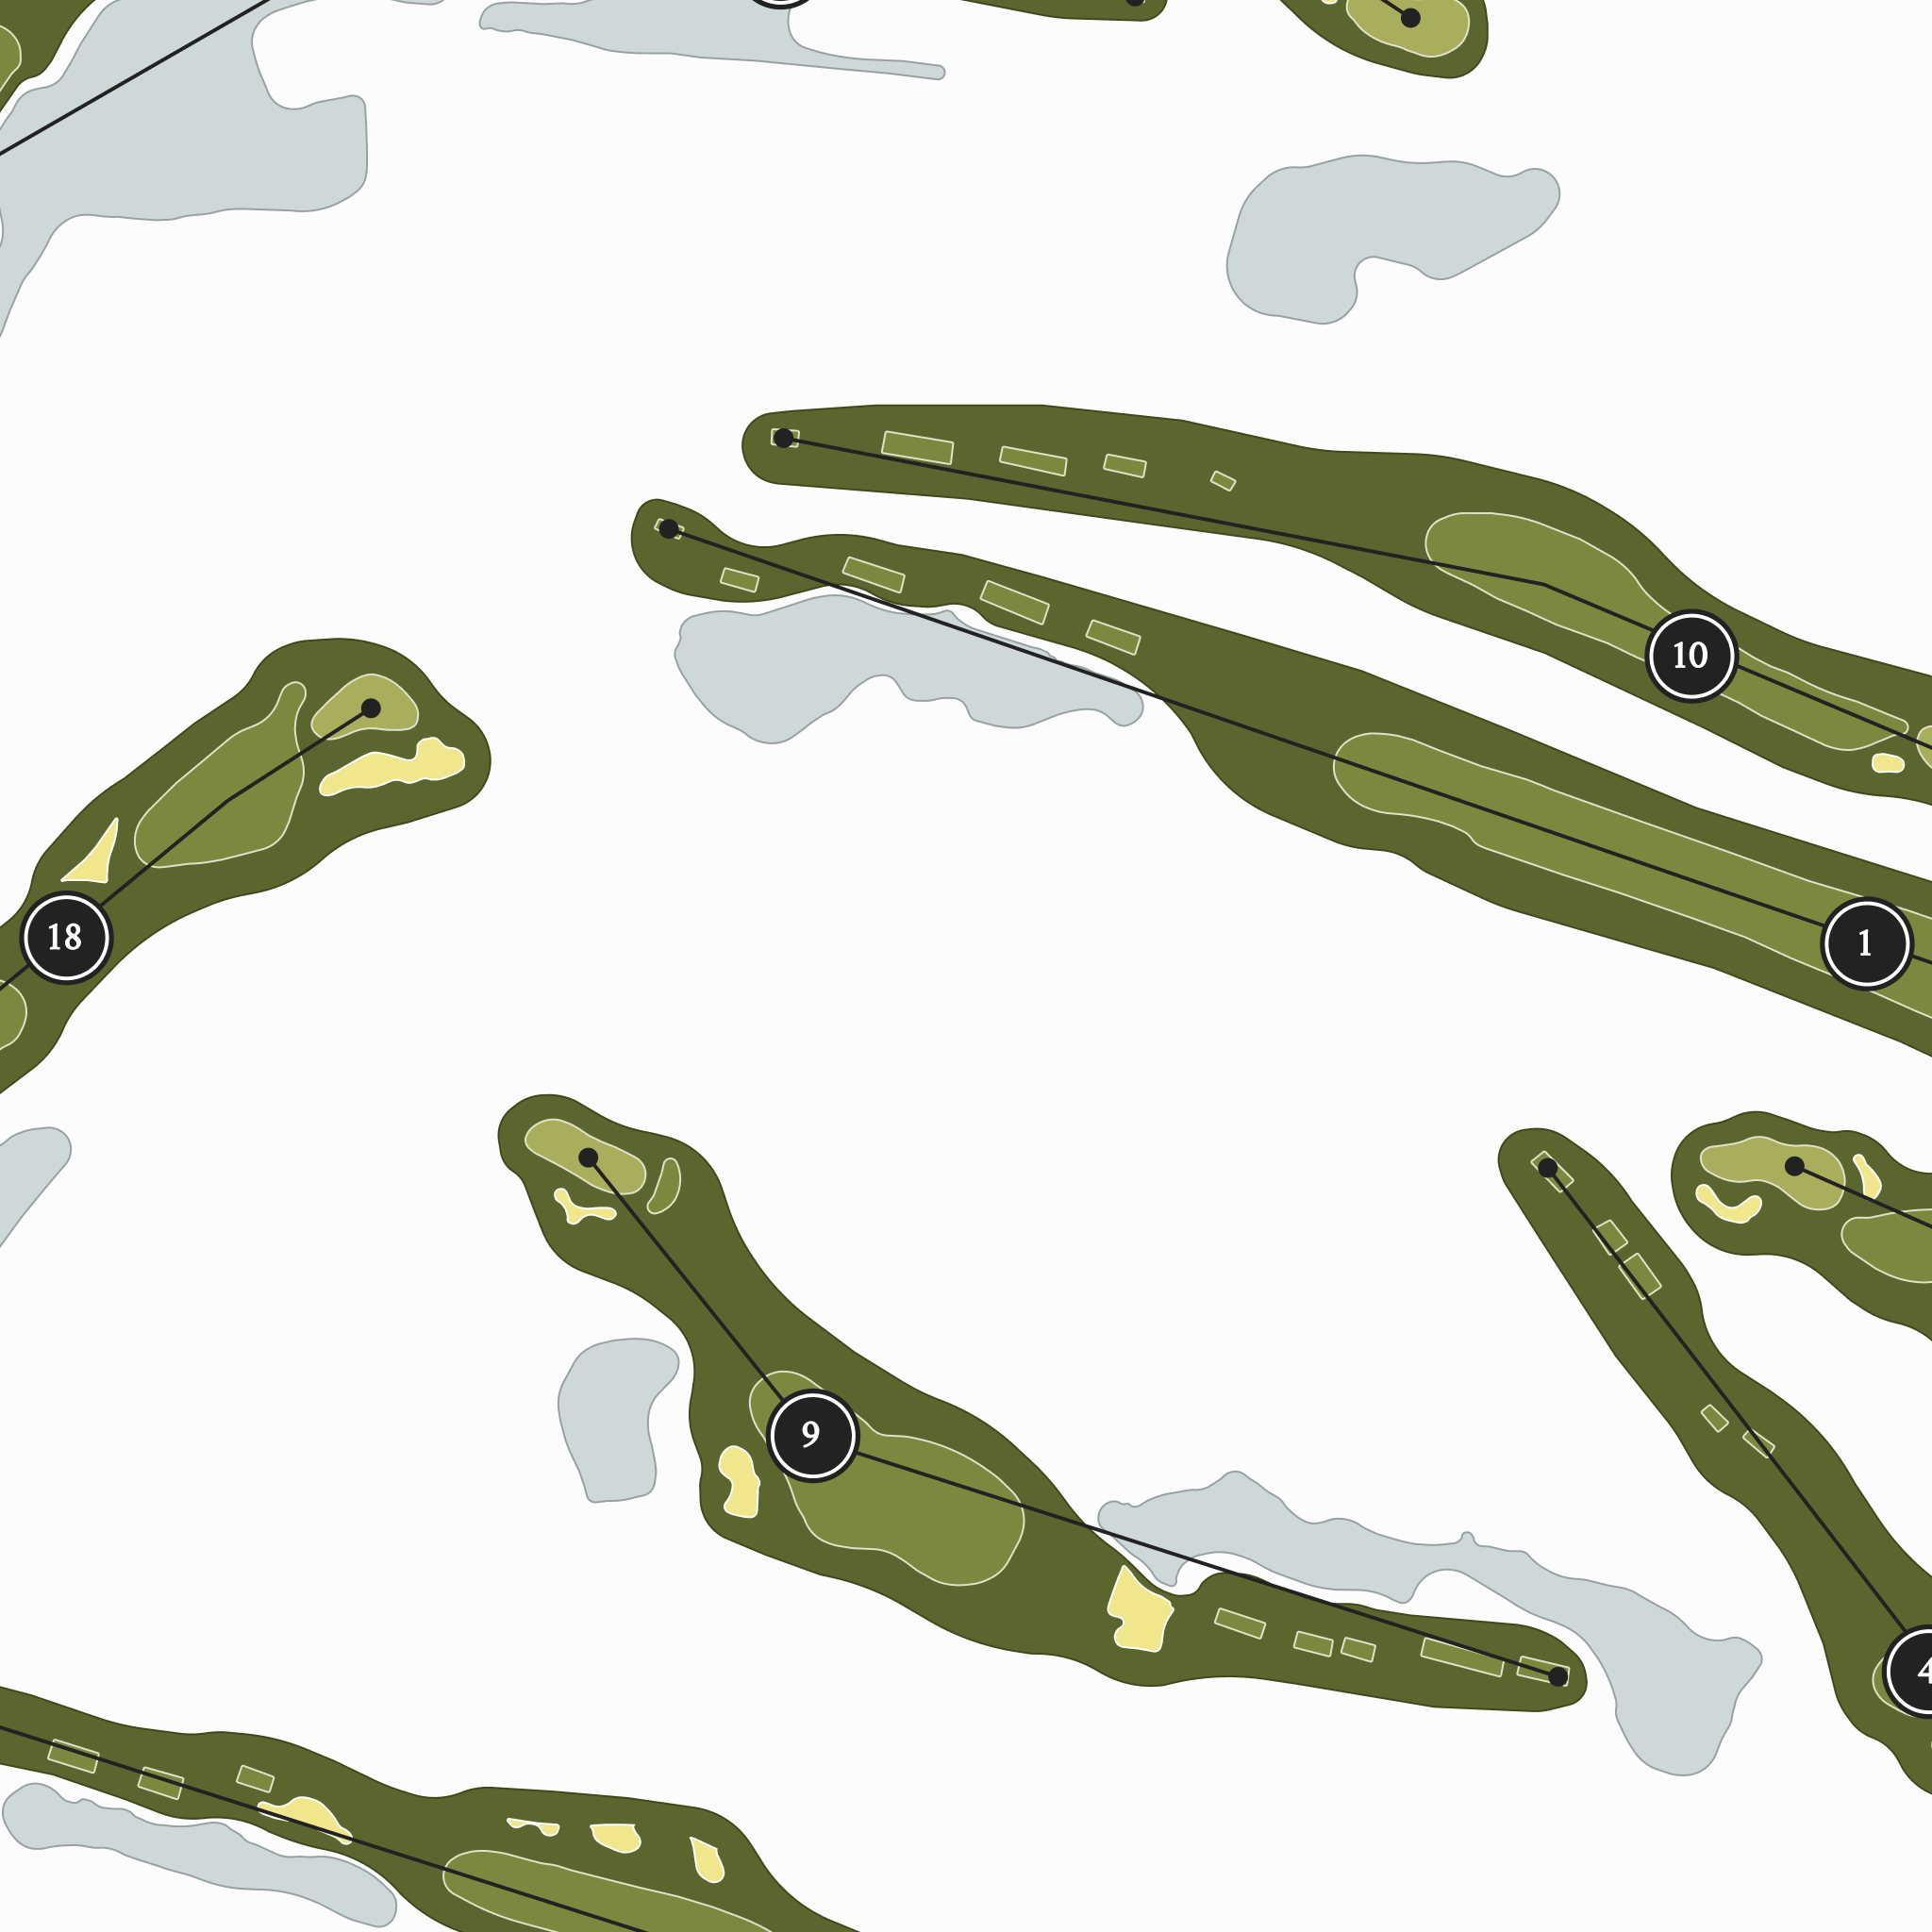 Lost Key Golf Club | Golf Course Map | Close Up With Hole Numbers #hole numbers_yes